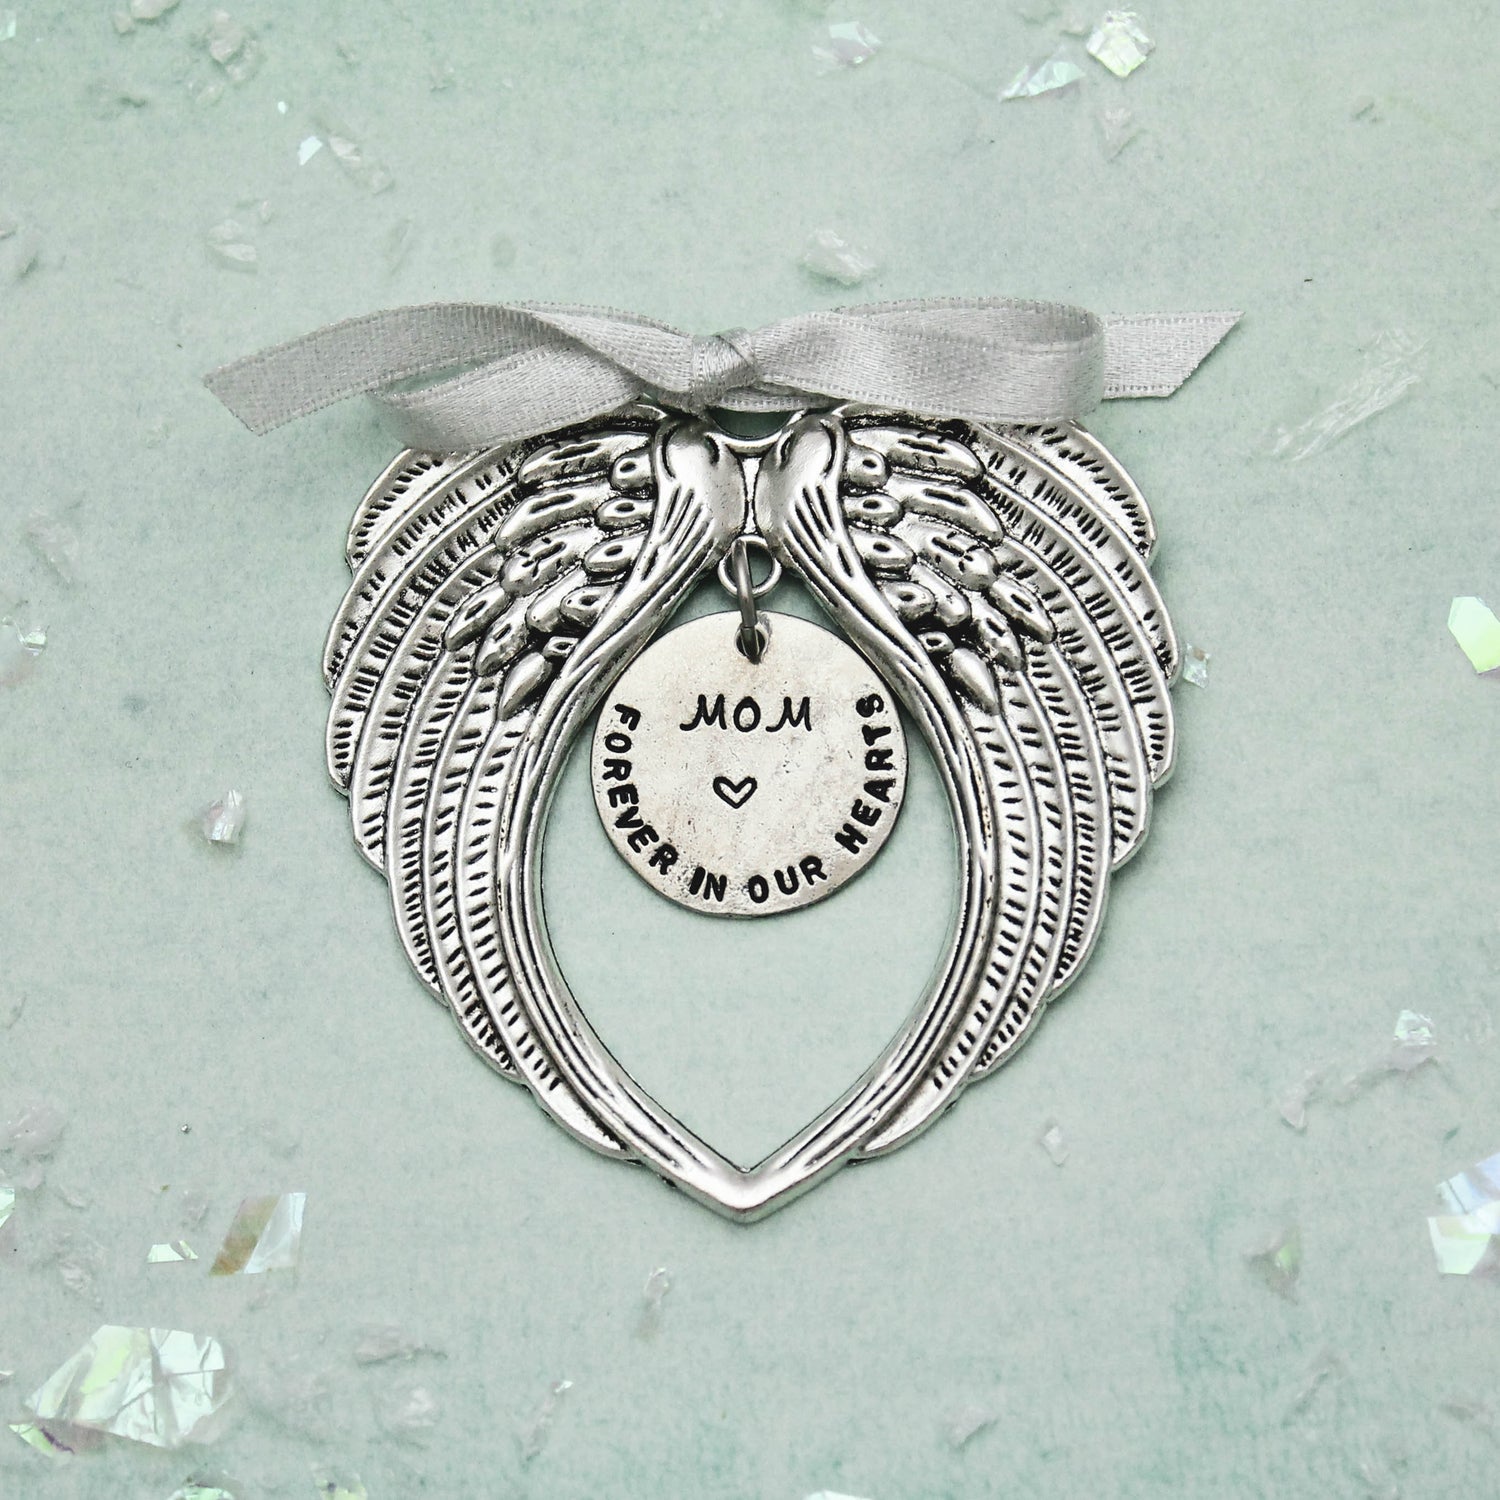 Personalized Memorial Christmas Ornament, In Memory Ornament, Remembrance Ornament Gift, Angel Wing Christmas Ornament, Hand Stamped